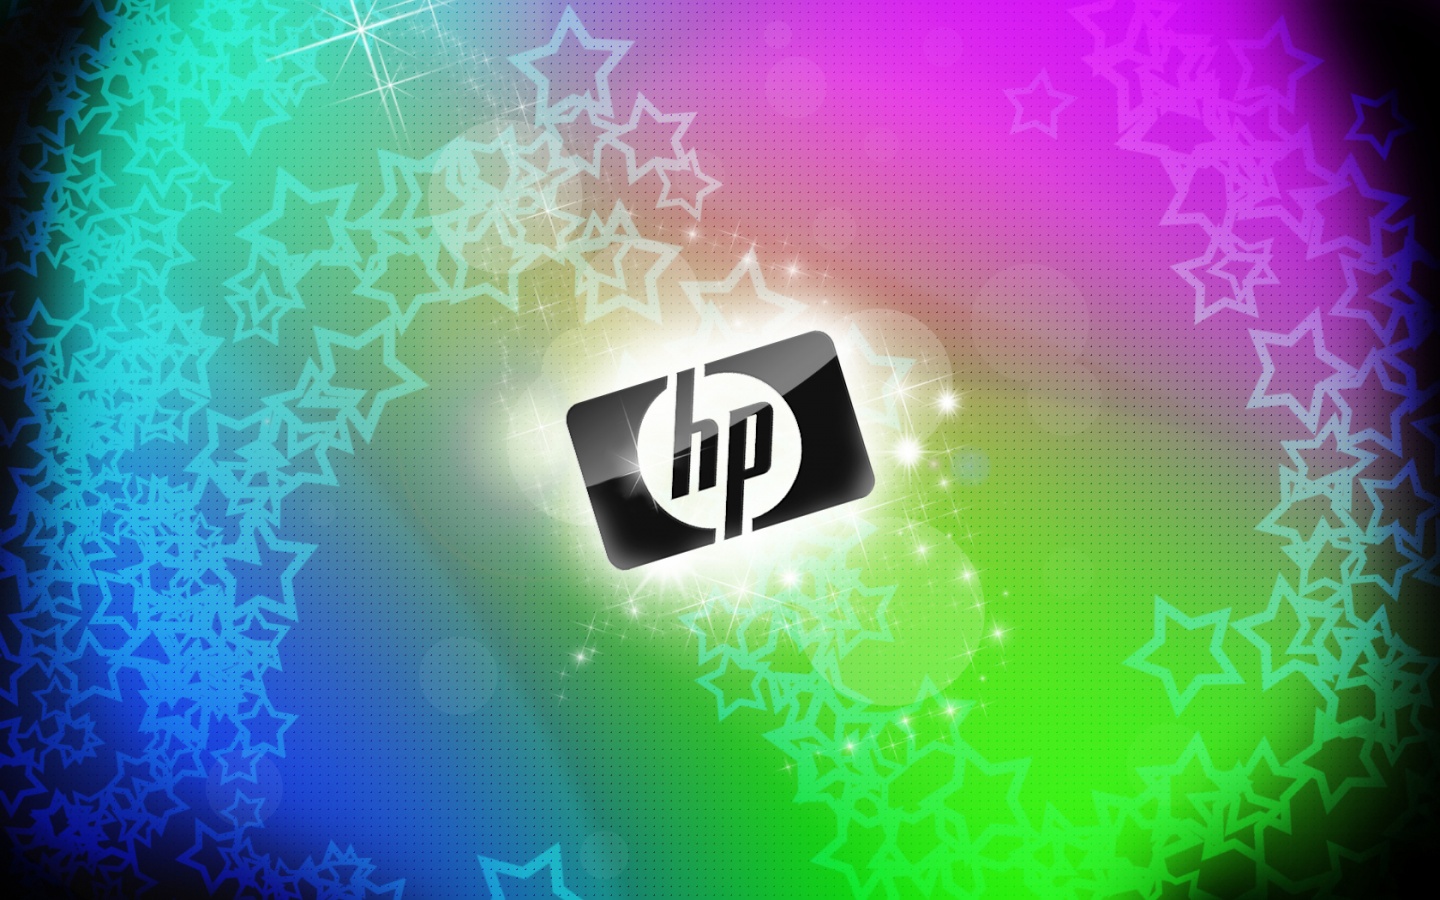 hp electronics wallpaper, hp logo picture ~ Popular Pictures